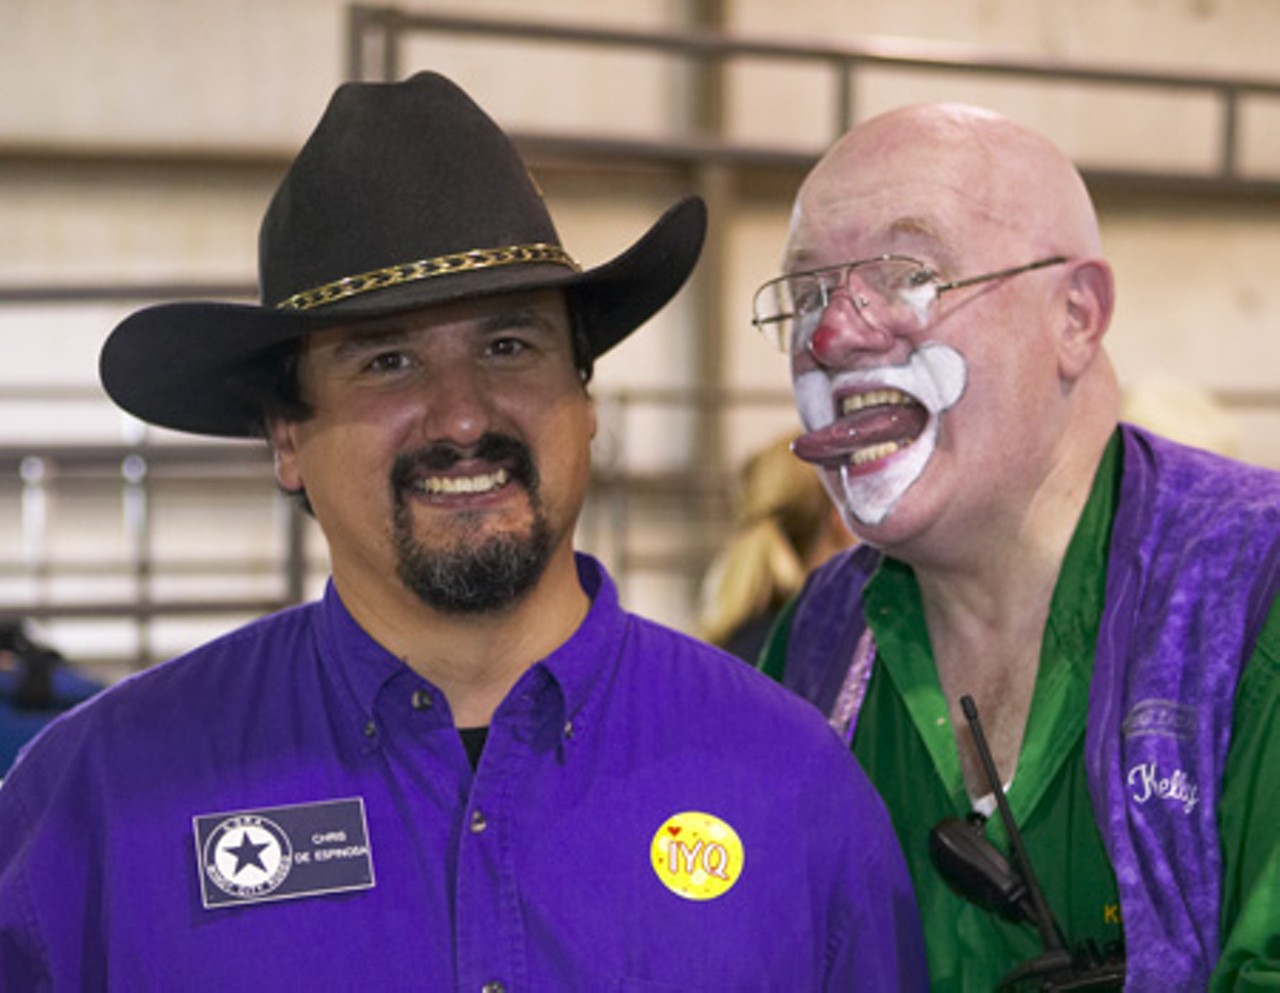 A rodeo clown protects the cowboys and cleans their ears.